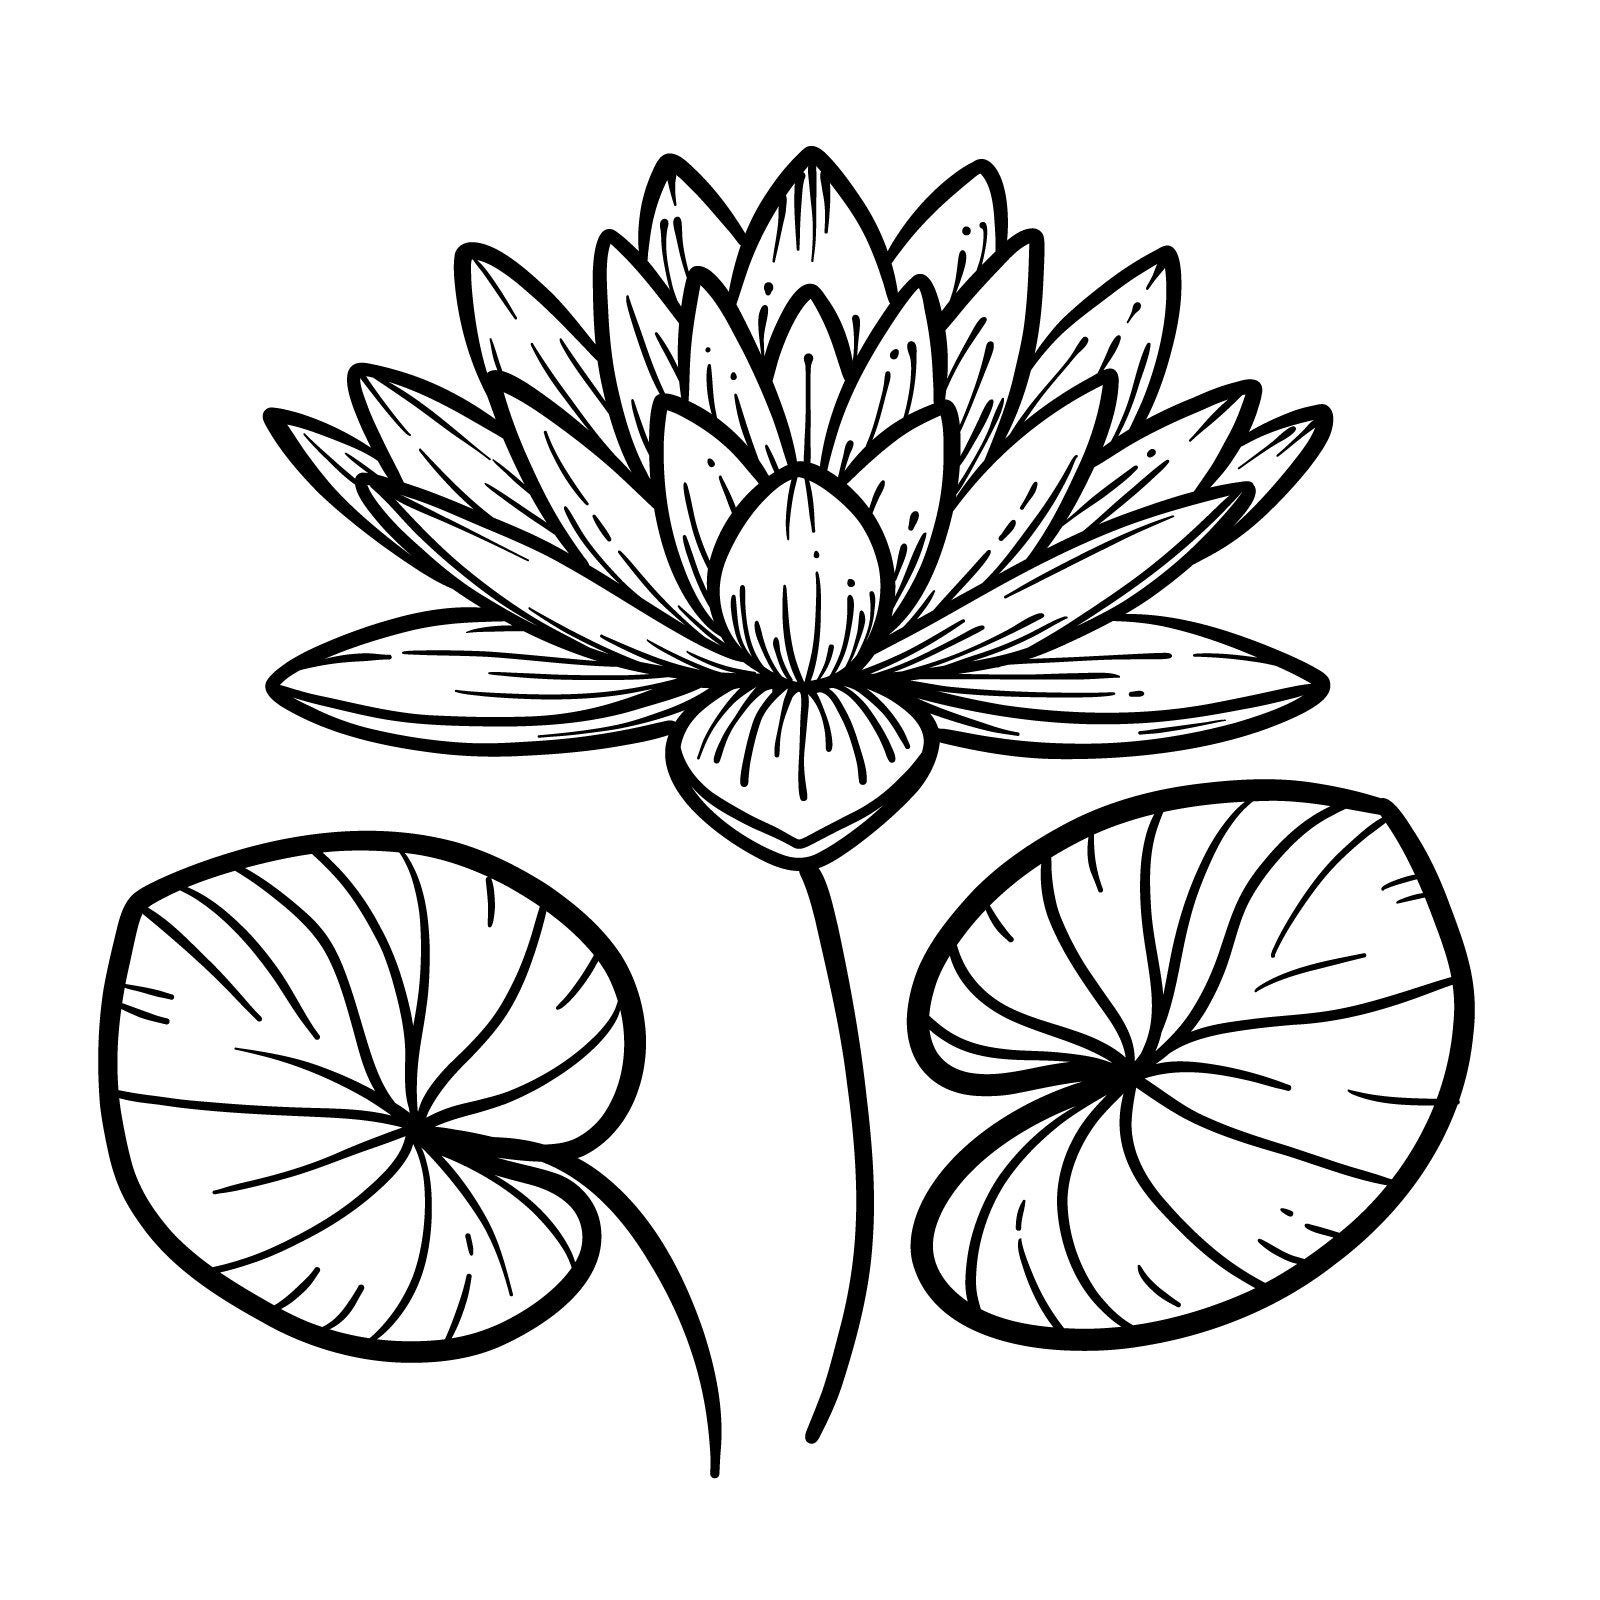 16 Water Lily Clipart - (Lotus Flower Pictures) - The Graphics Fairy